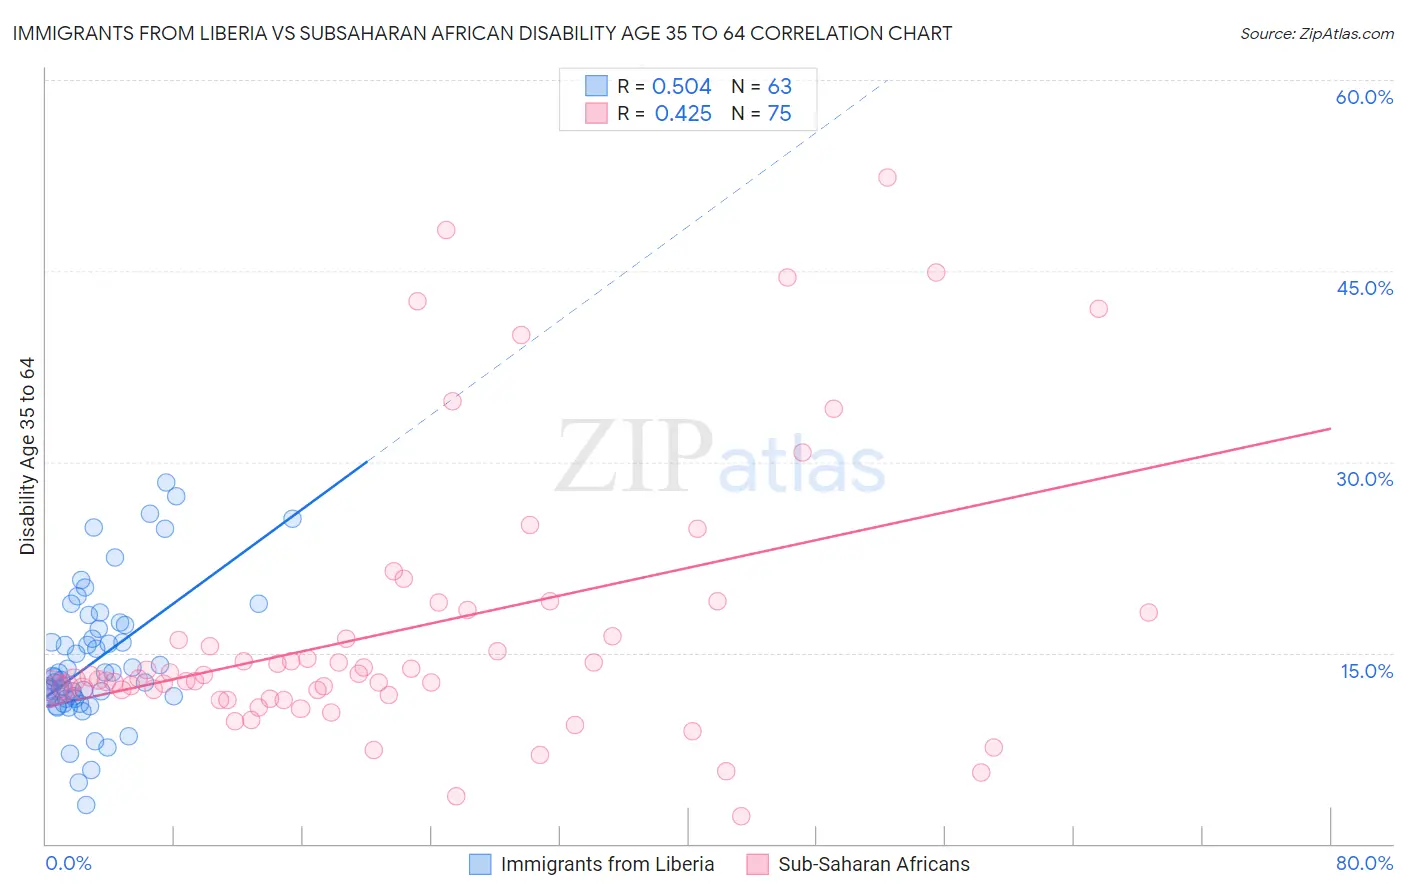 Immigrants from Liberia vs Subsaharan African Disability Age 35 to 64